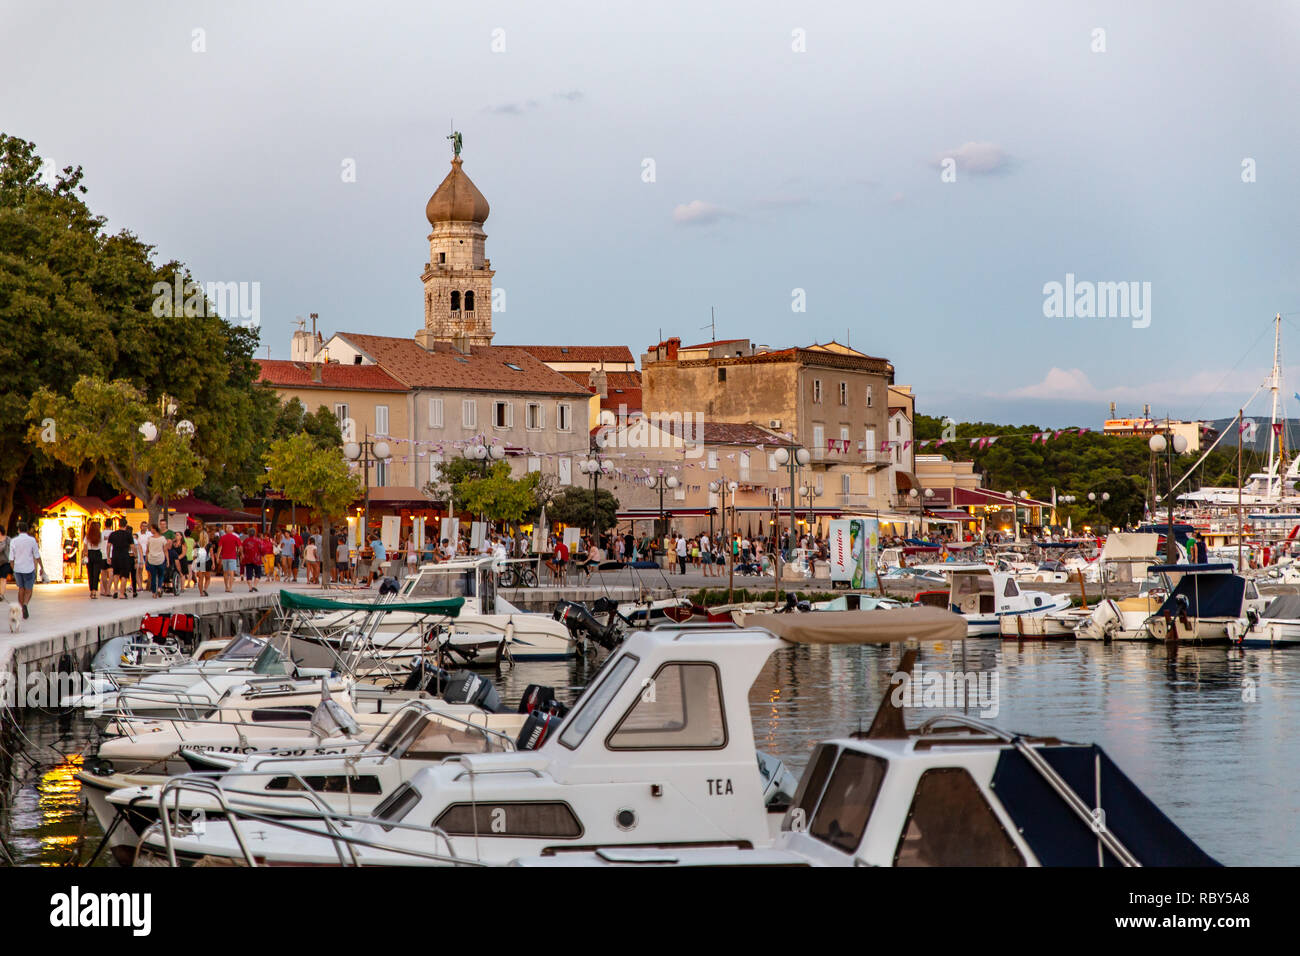 Boats and yachts in the harbour in front of the Old historic Town of Krk. The Cathedral of the Assumption of the Blessed Virgin Mary in the background. Stock Photo